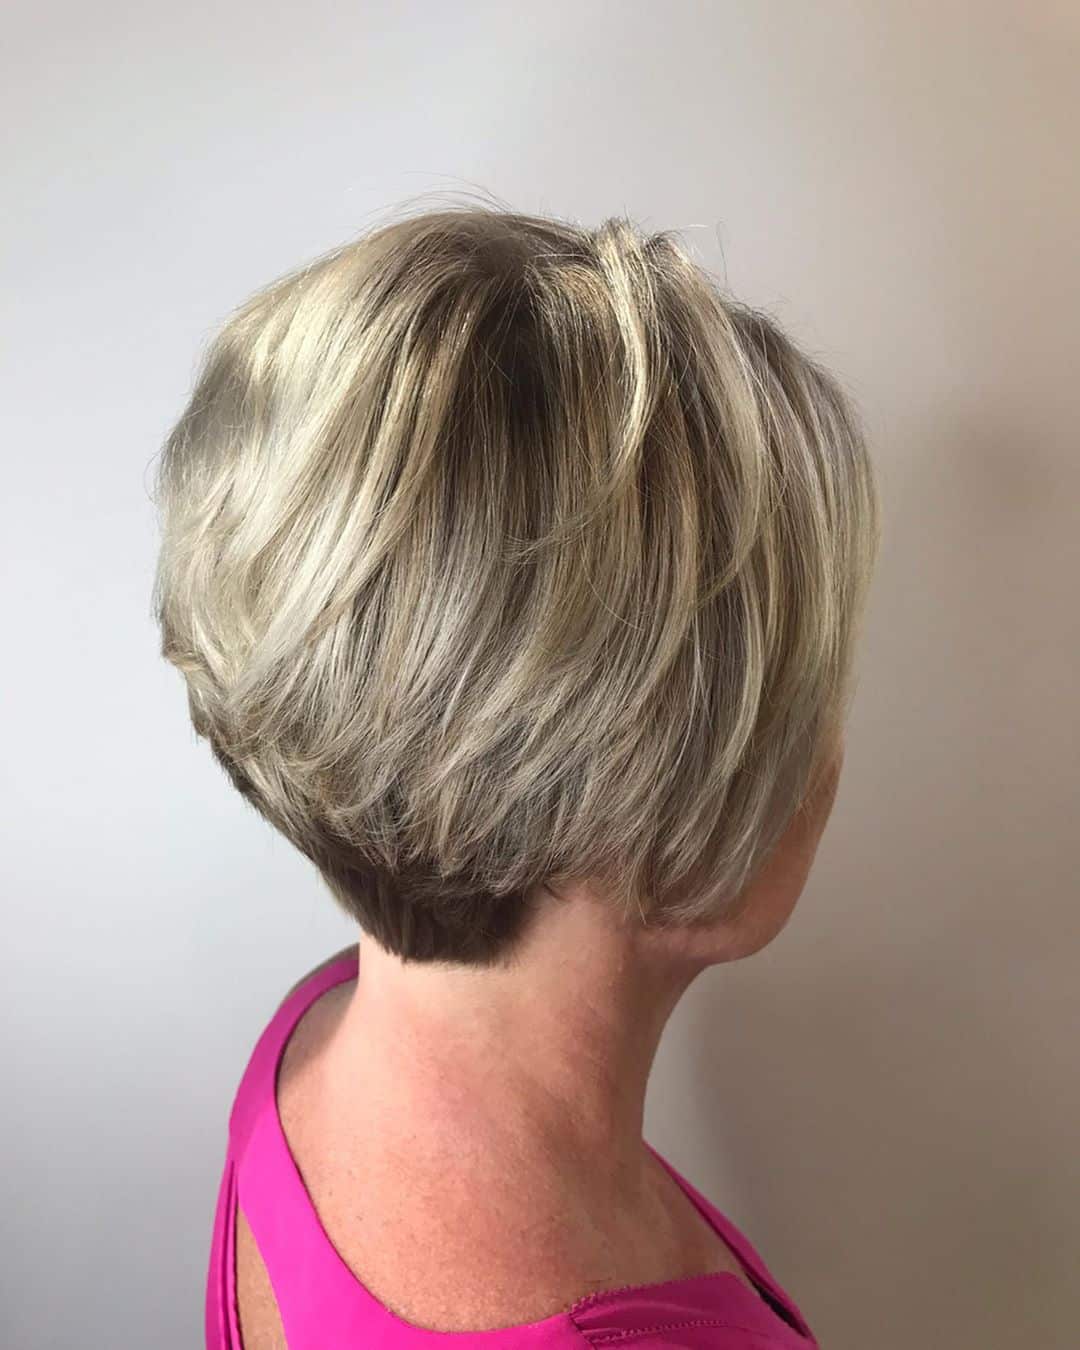 Healthy-Looking Short Stacked Pixie Haircut